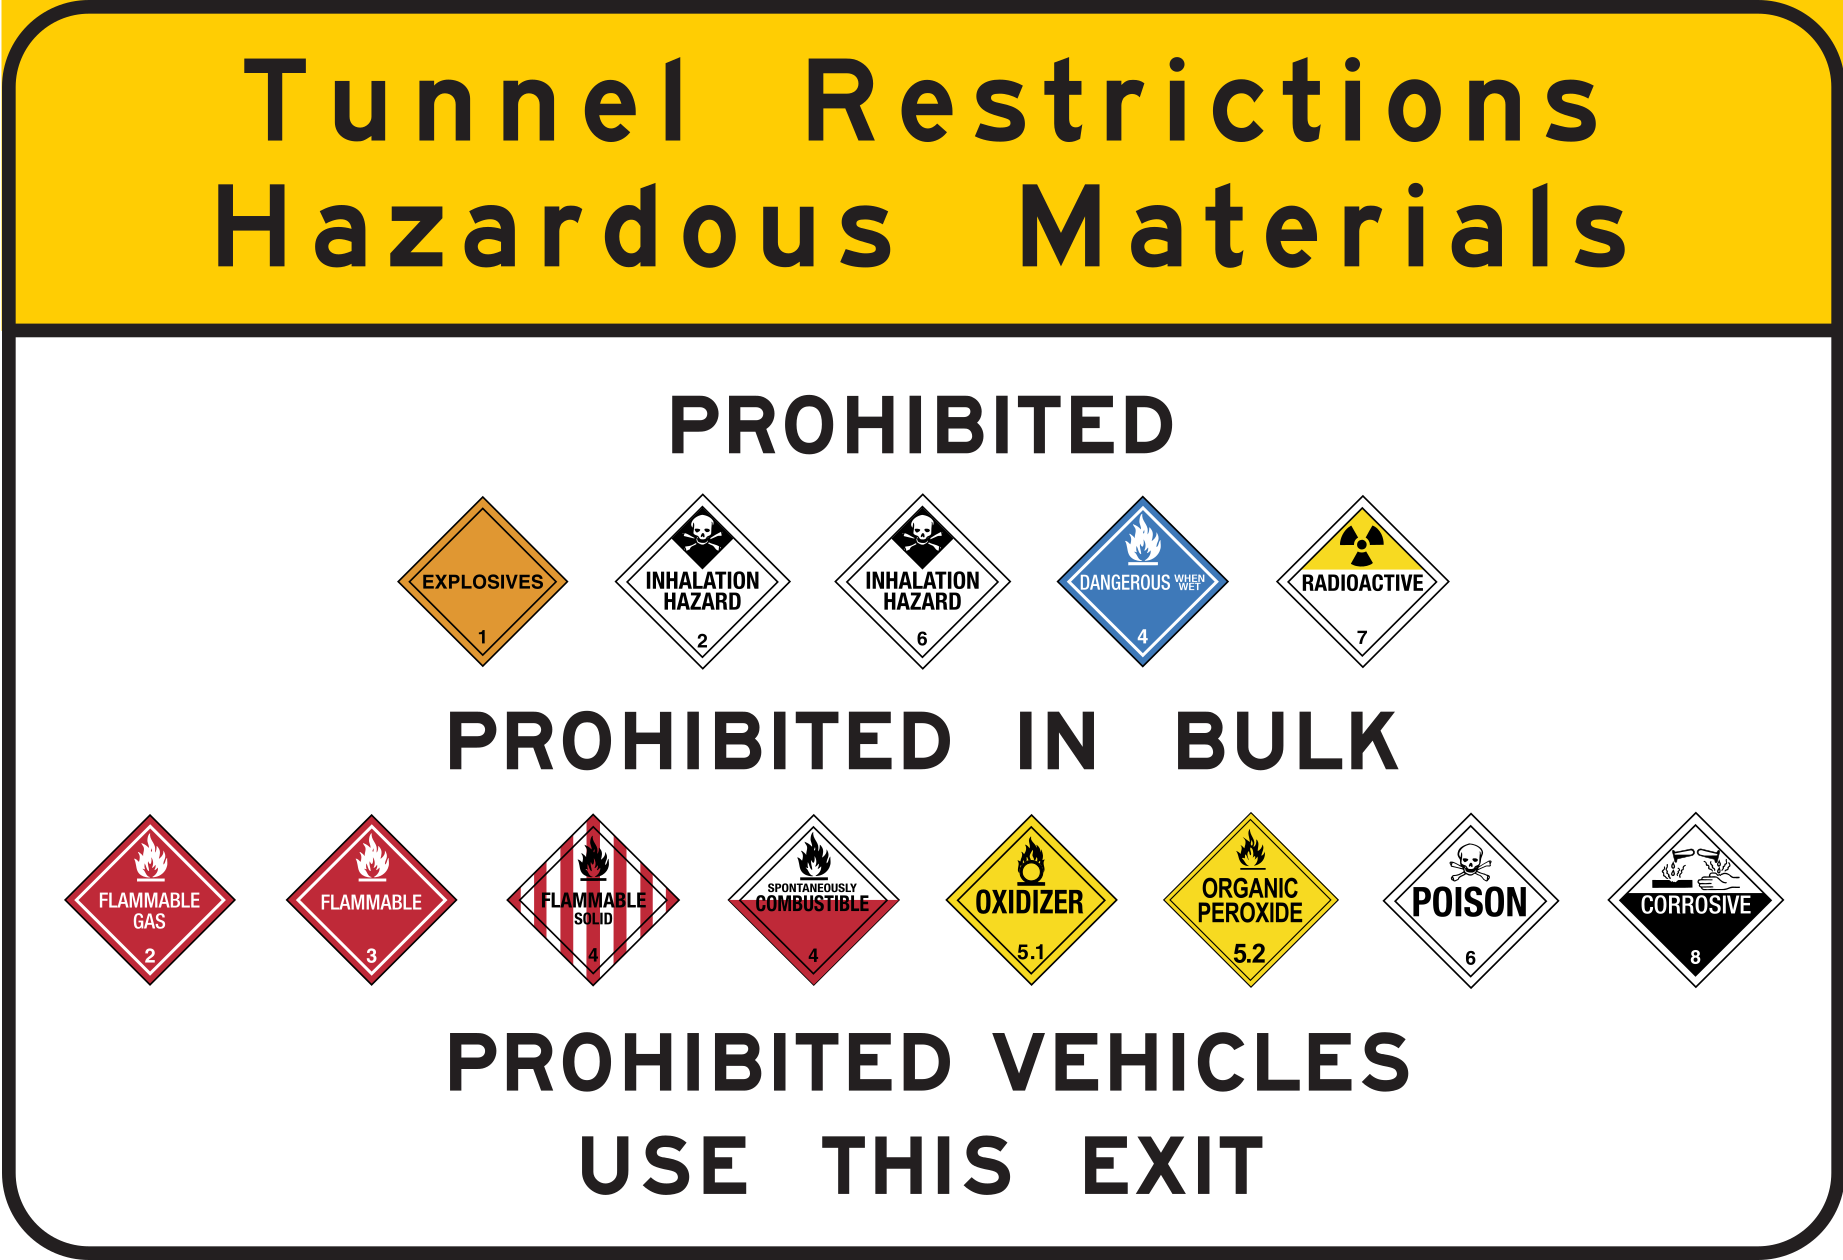 High Quality Pennsylvania Turnpike Restricted Materials Blank Meme Template